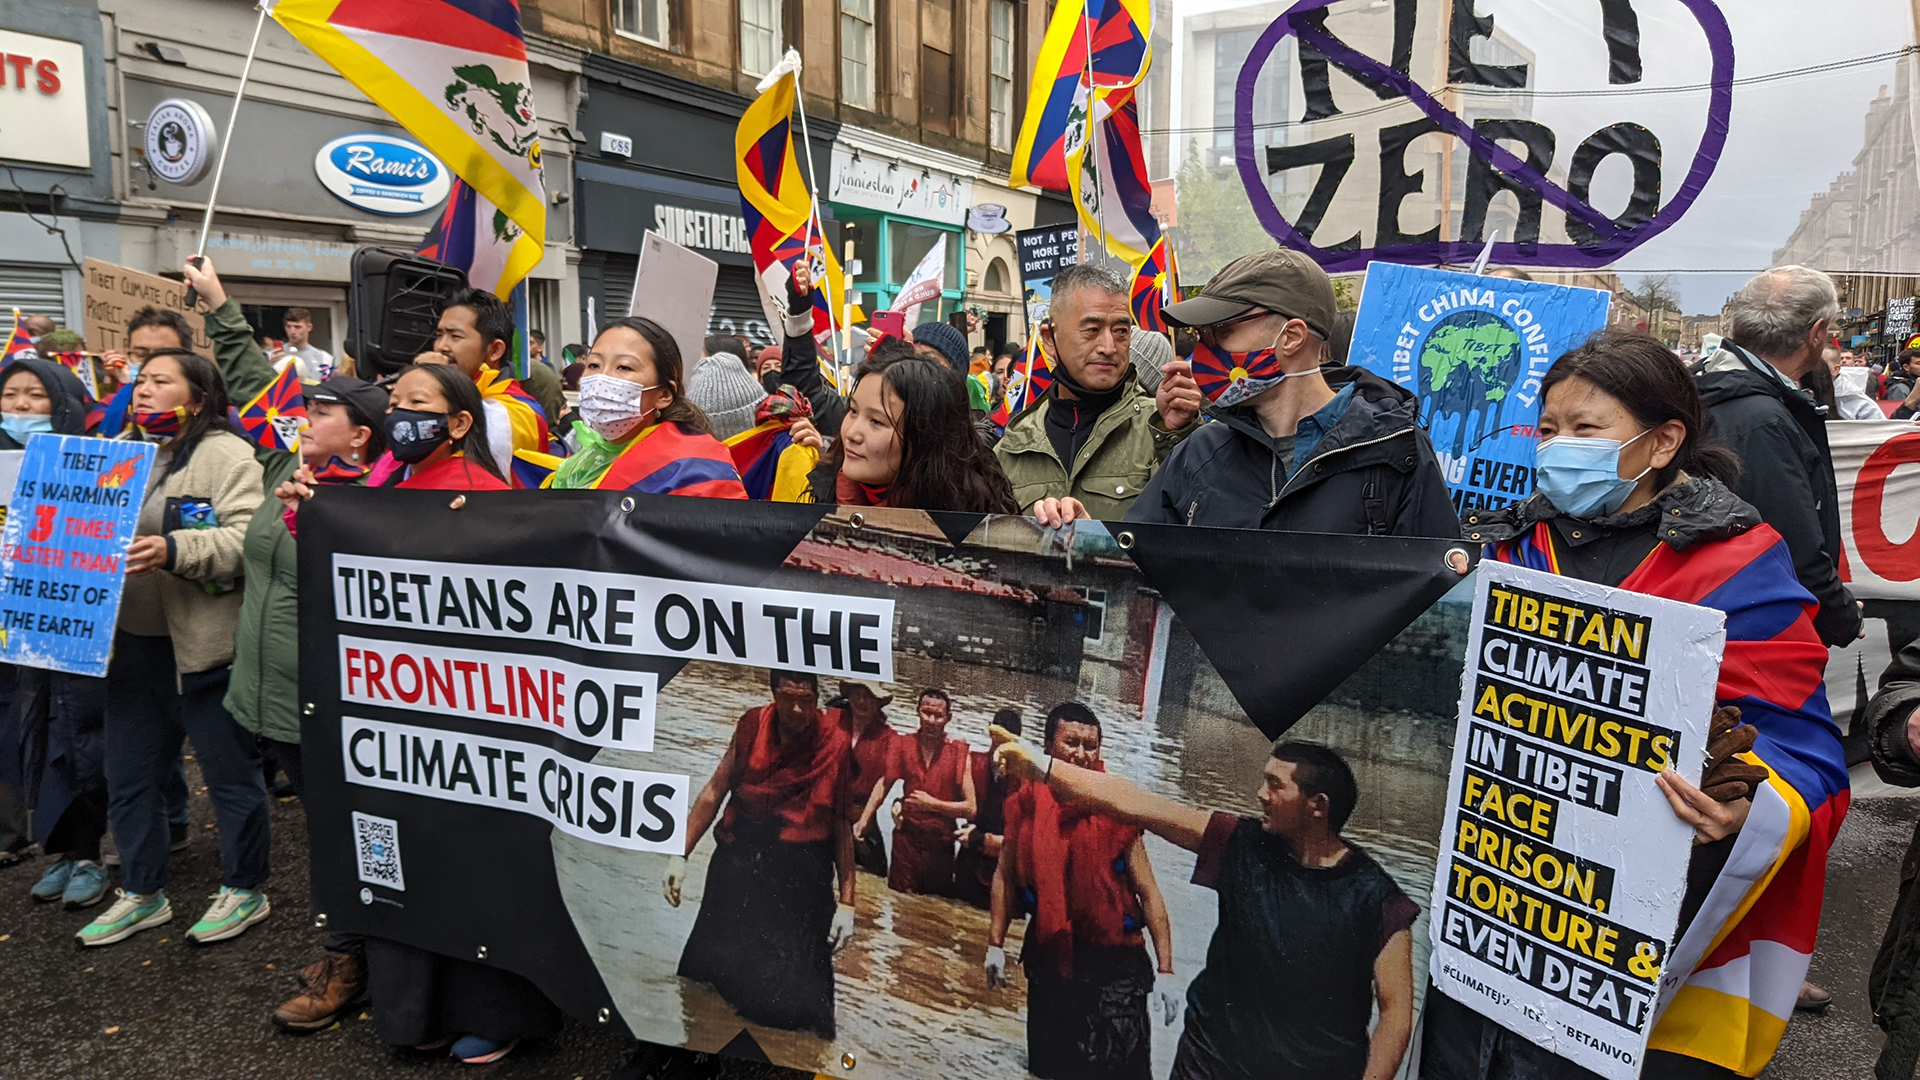 Tibetan activists march at COP26 in Glasgow, carrying banners and Tibetan flags.